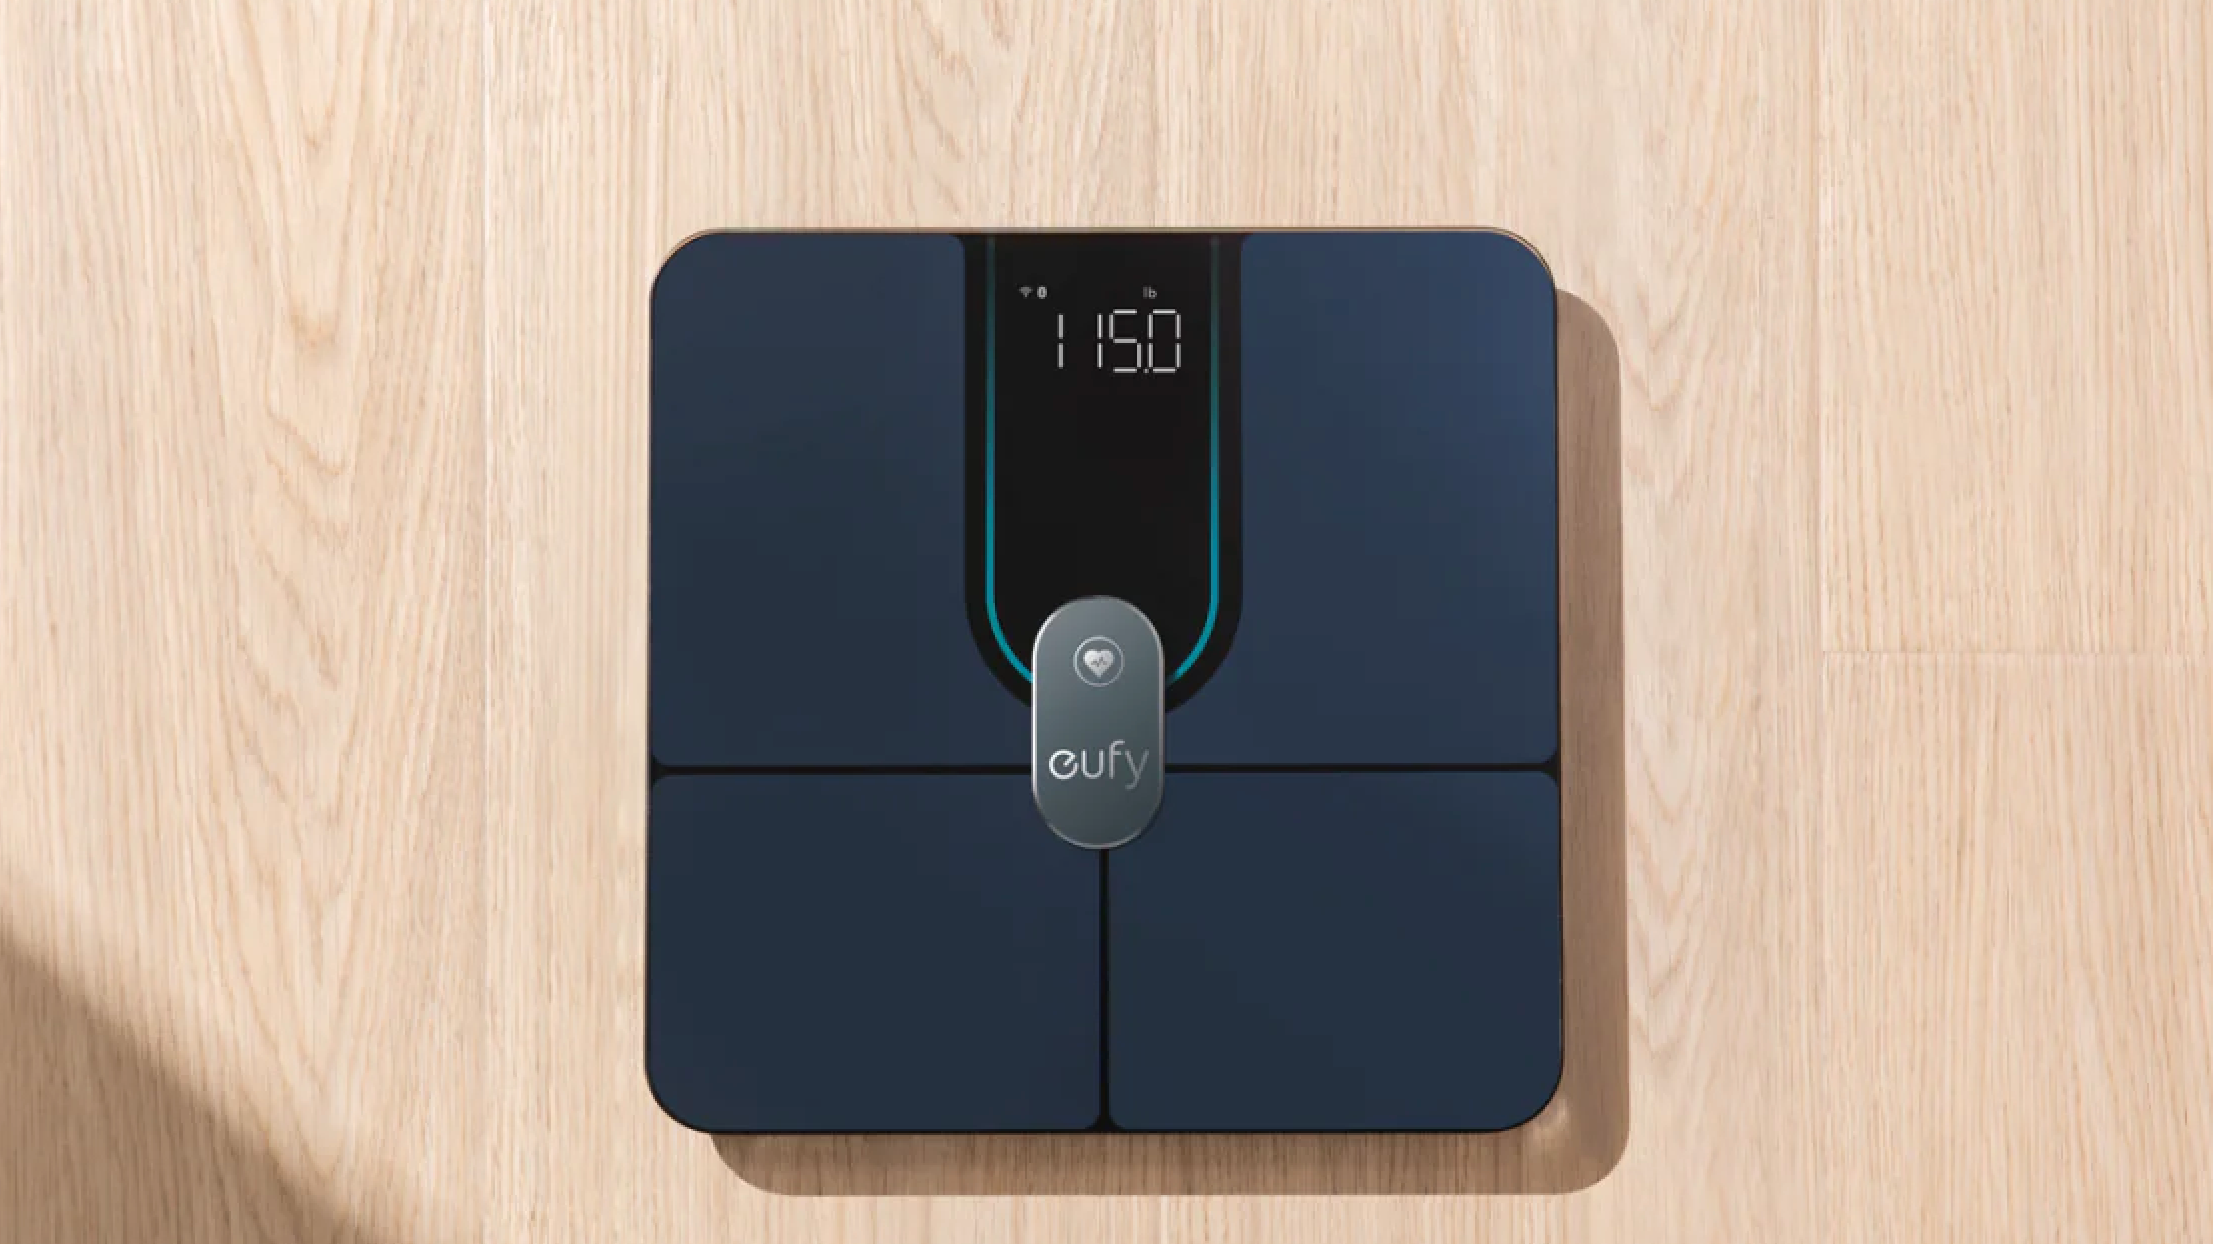 eufy Smart Scale P2 Pro, Digital Bathroom Scale with Wi-Fi Bluetooth, 16  Measurements UNBOXING 